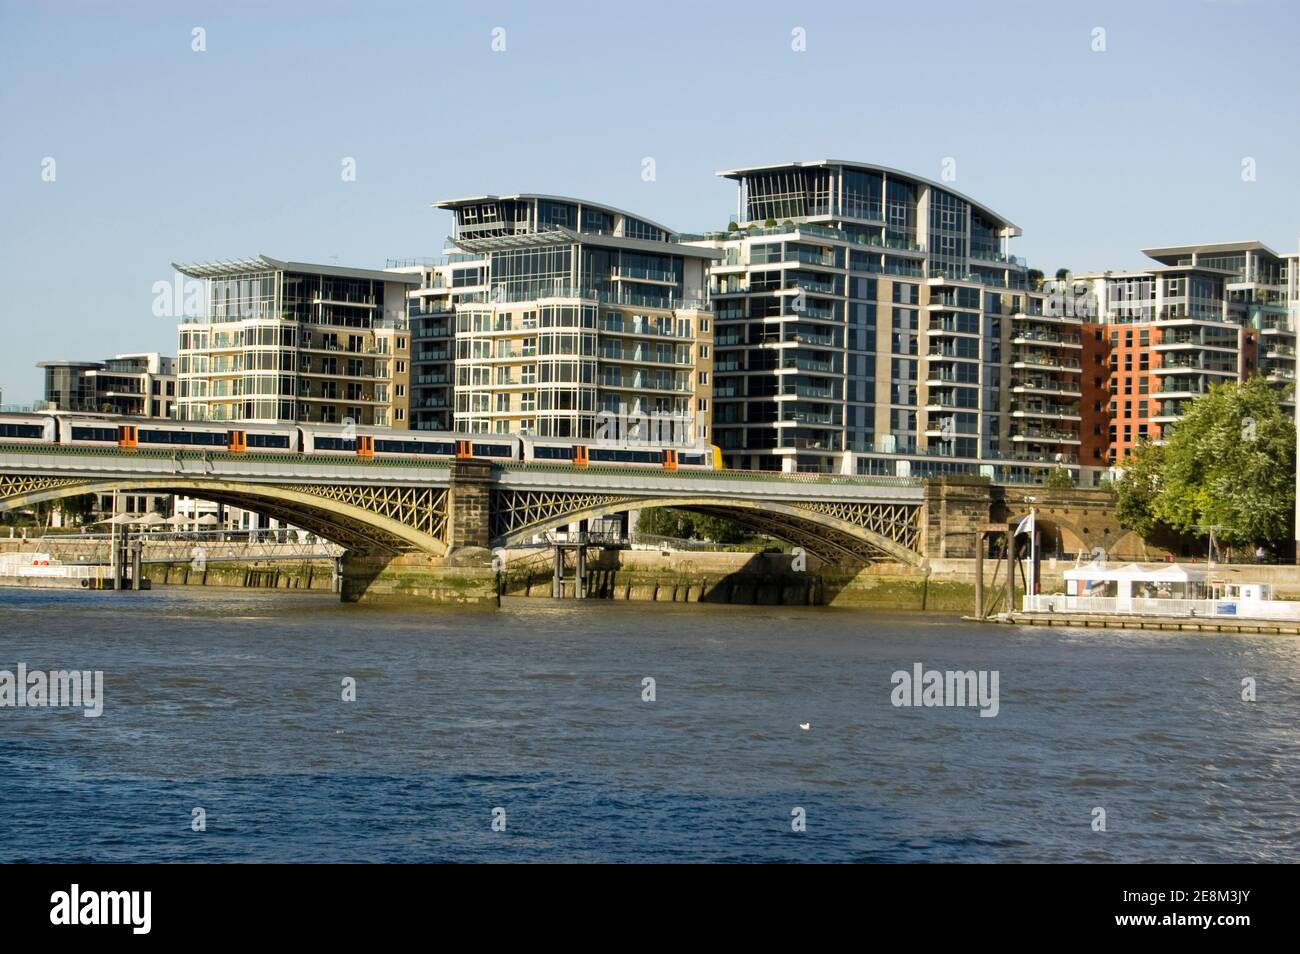 A London Transport overground train travelling over the Cremorne Railway Bridge over the River Thames at Chelsea. Stock Photo